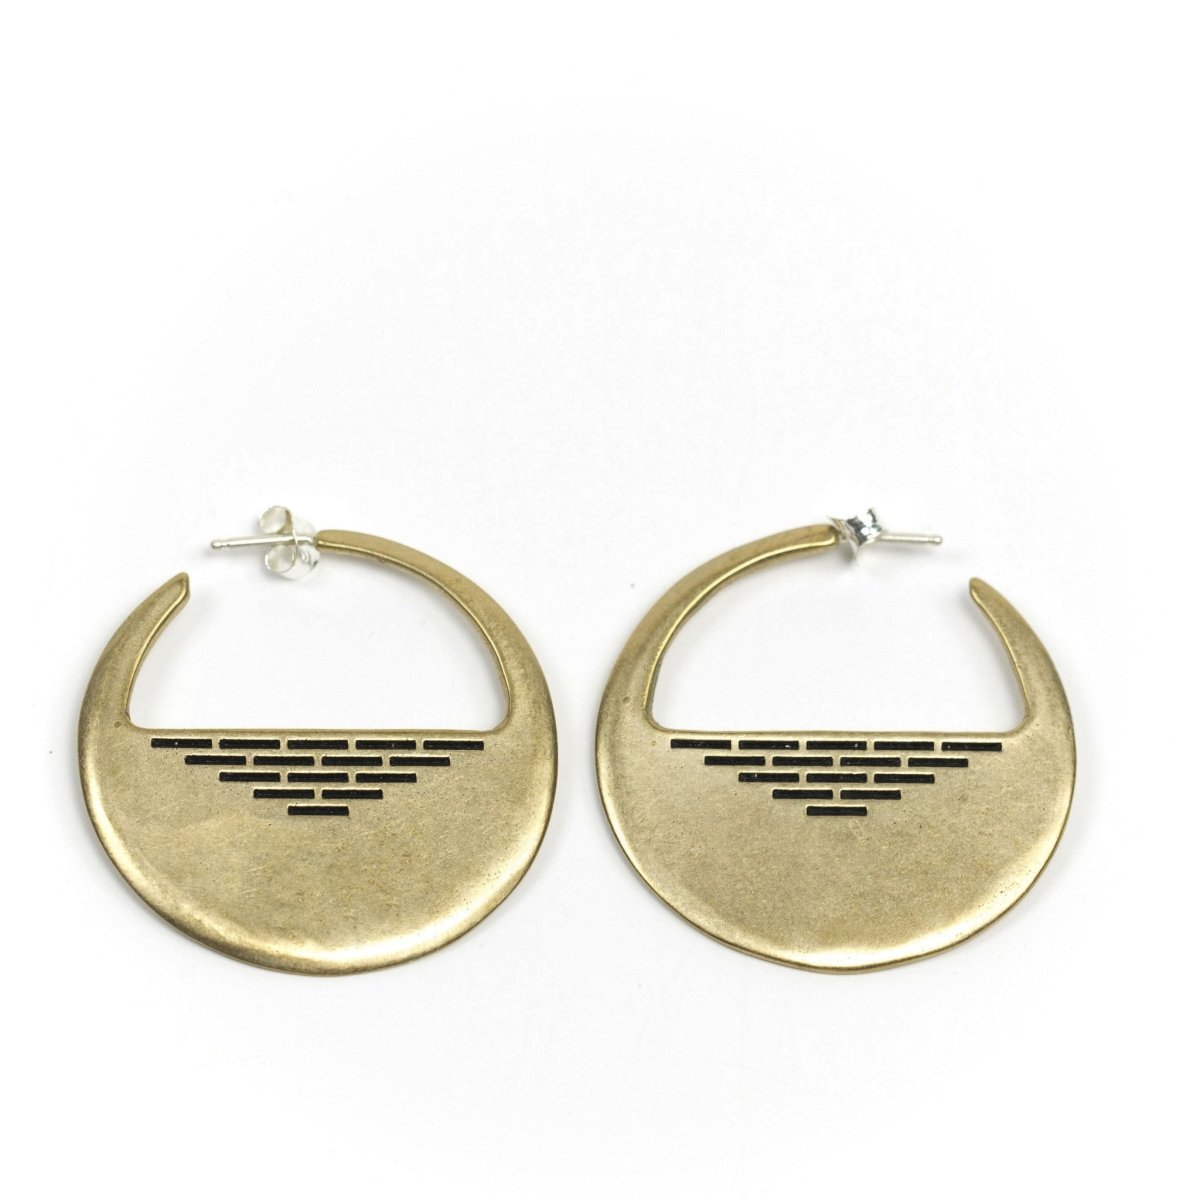 A pair of cast-bronze disc hoop earrings, decorated with a pyramid of geometric, black paint detail through the center of the disc, and finished with sterling silver posts and butterfly backings. Hand-crafted in Portland, Oregon. 